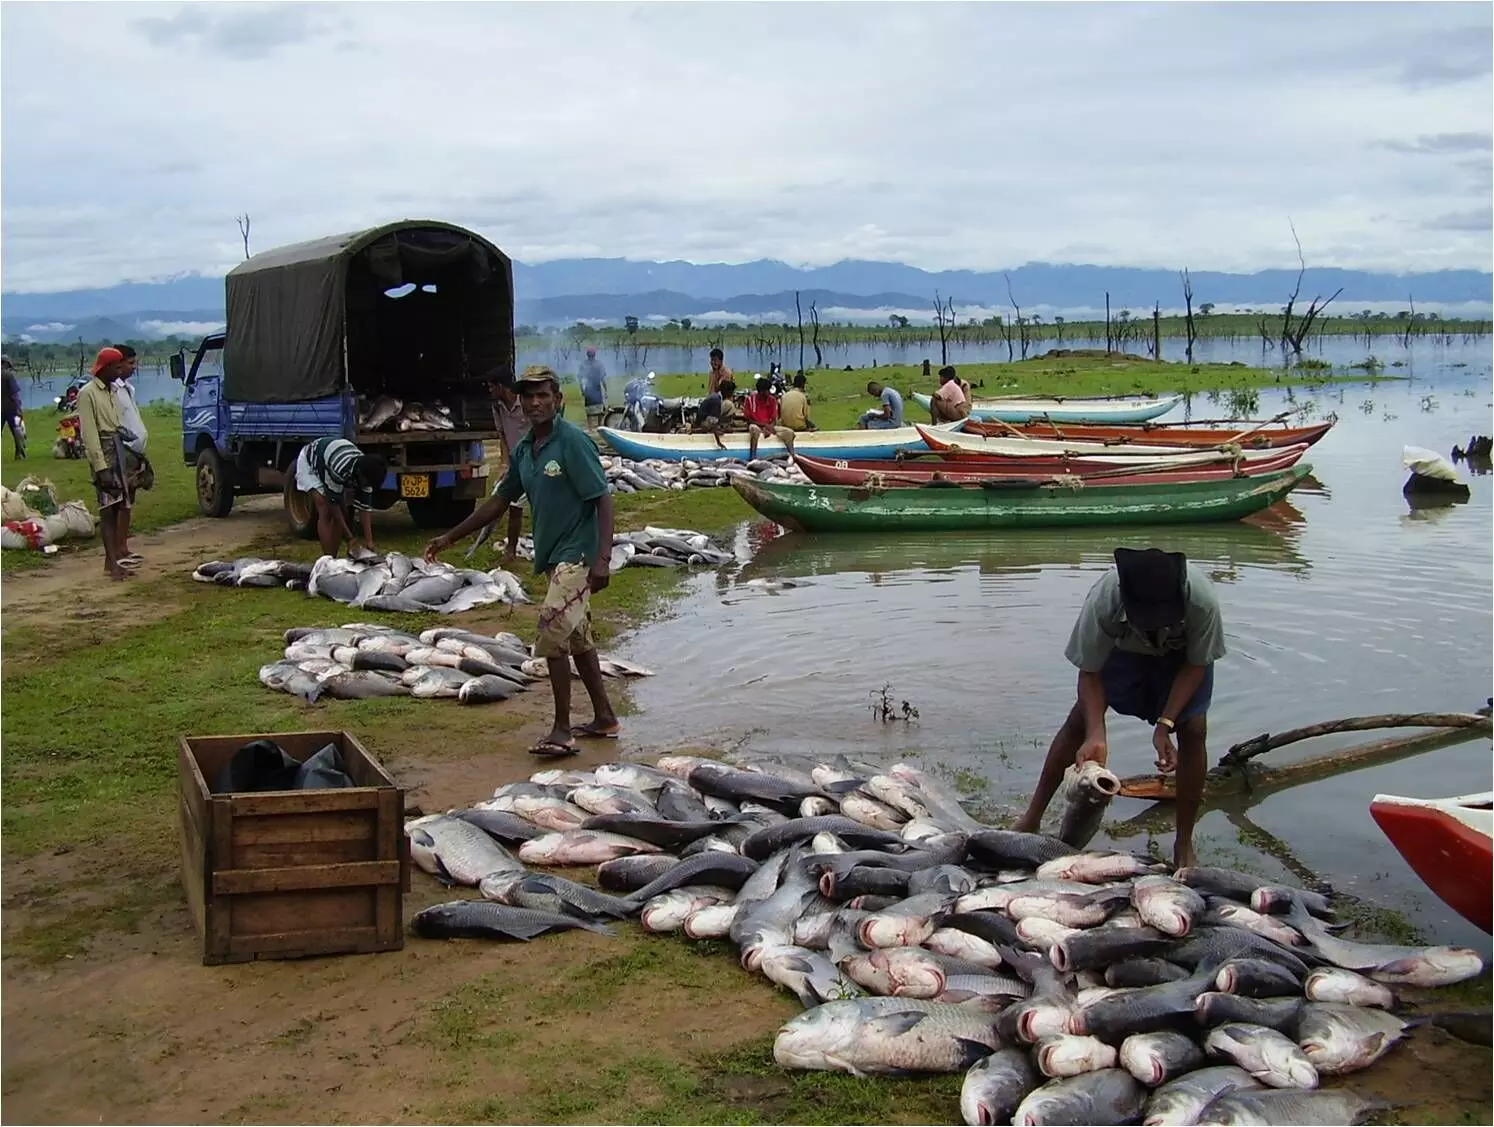 Stakeholders call for certification of fishery imports/exports